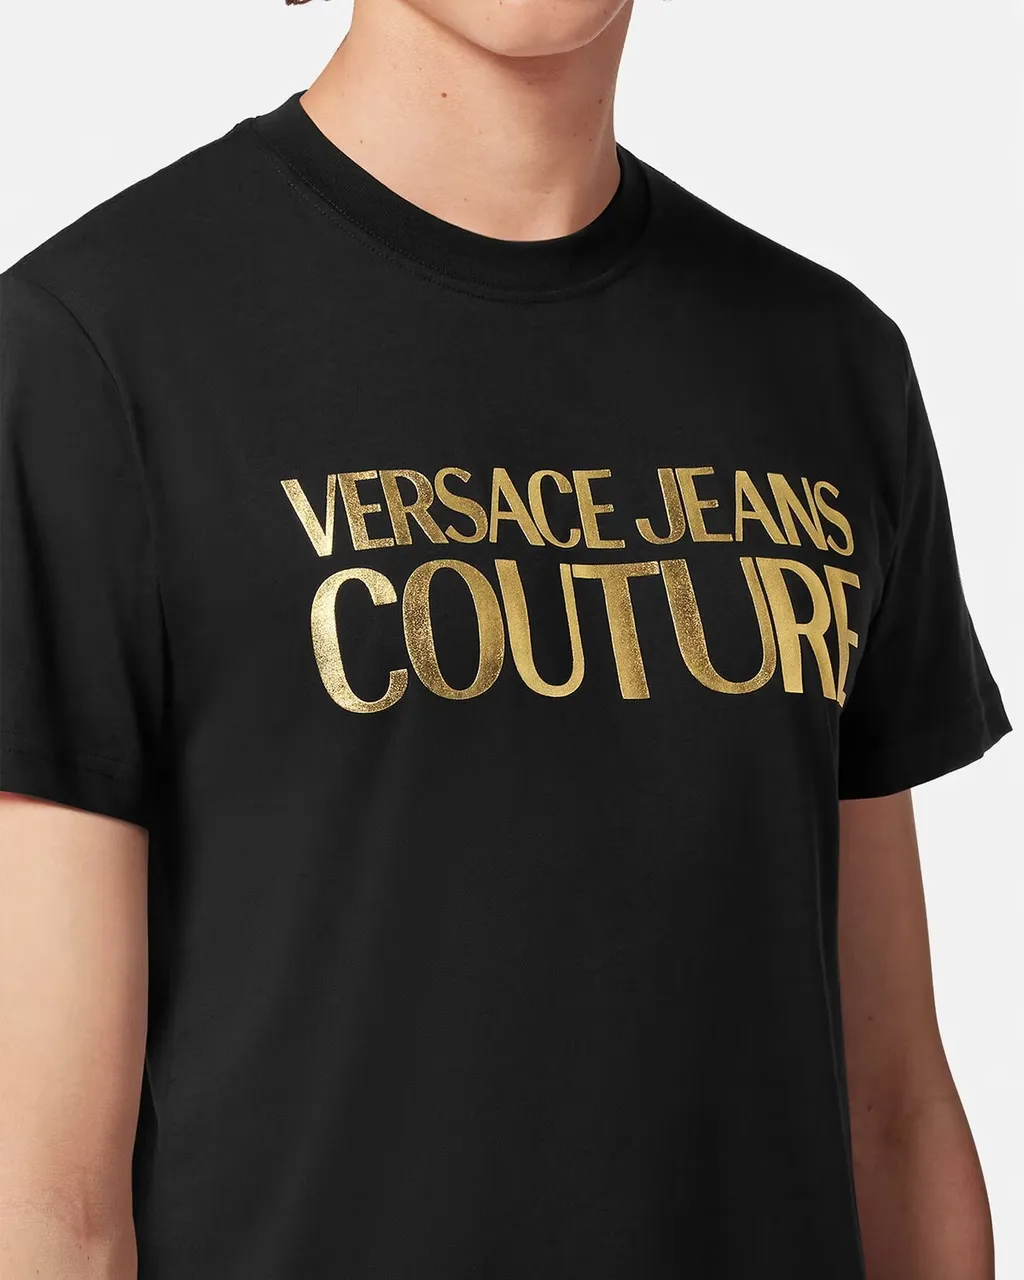 Versace Jeans Versace jeans couture tee branding gold